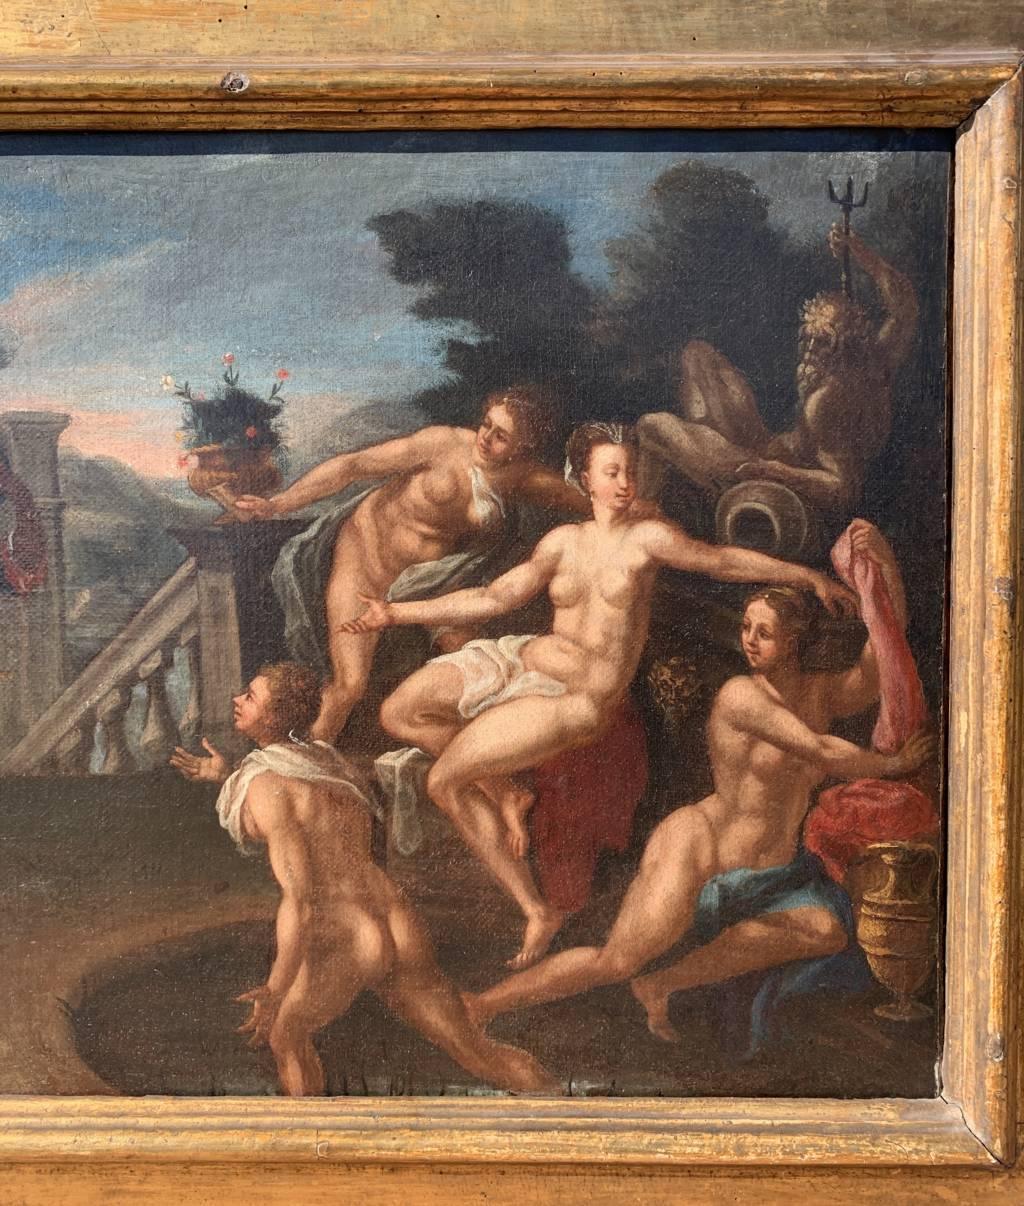 Italian master (17th century) - David and Bathsheba bathing.

49.5 x 64.5 cm without frame, 68 x 84 cm with frame.

Antique oil painting on canvas, in an antique carved and gilded wooden frame.

Condition report: Lined canvas. Good condition of the